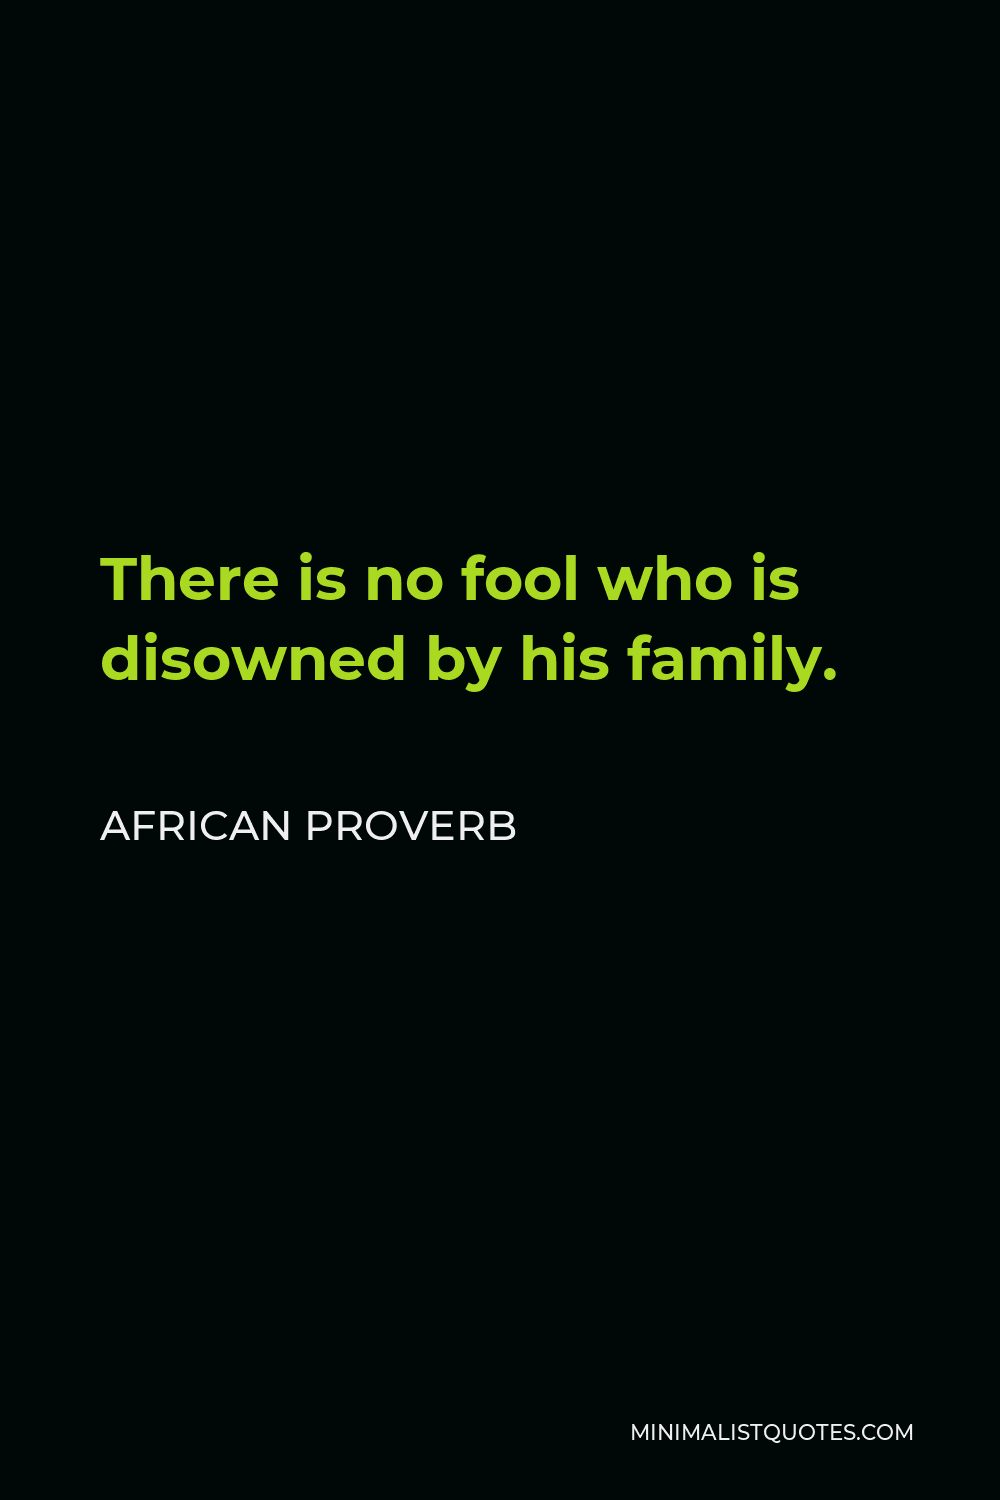 African Proverb Quote - There is no fool who is disowned by his family.